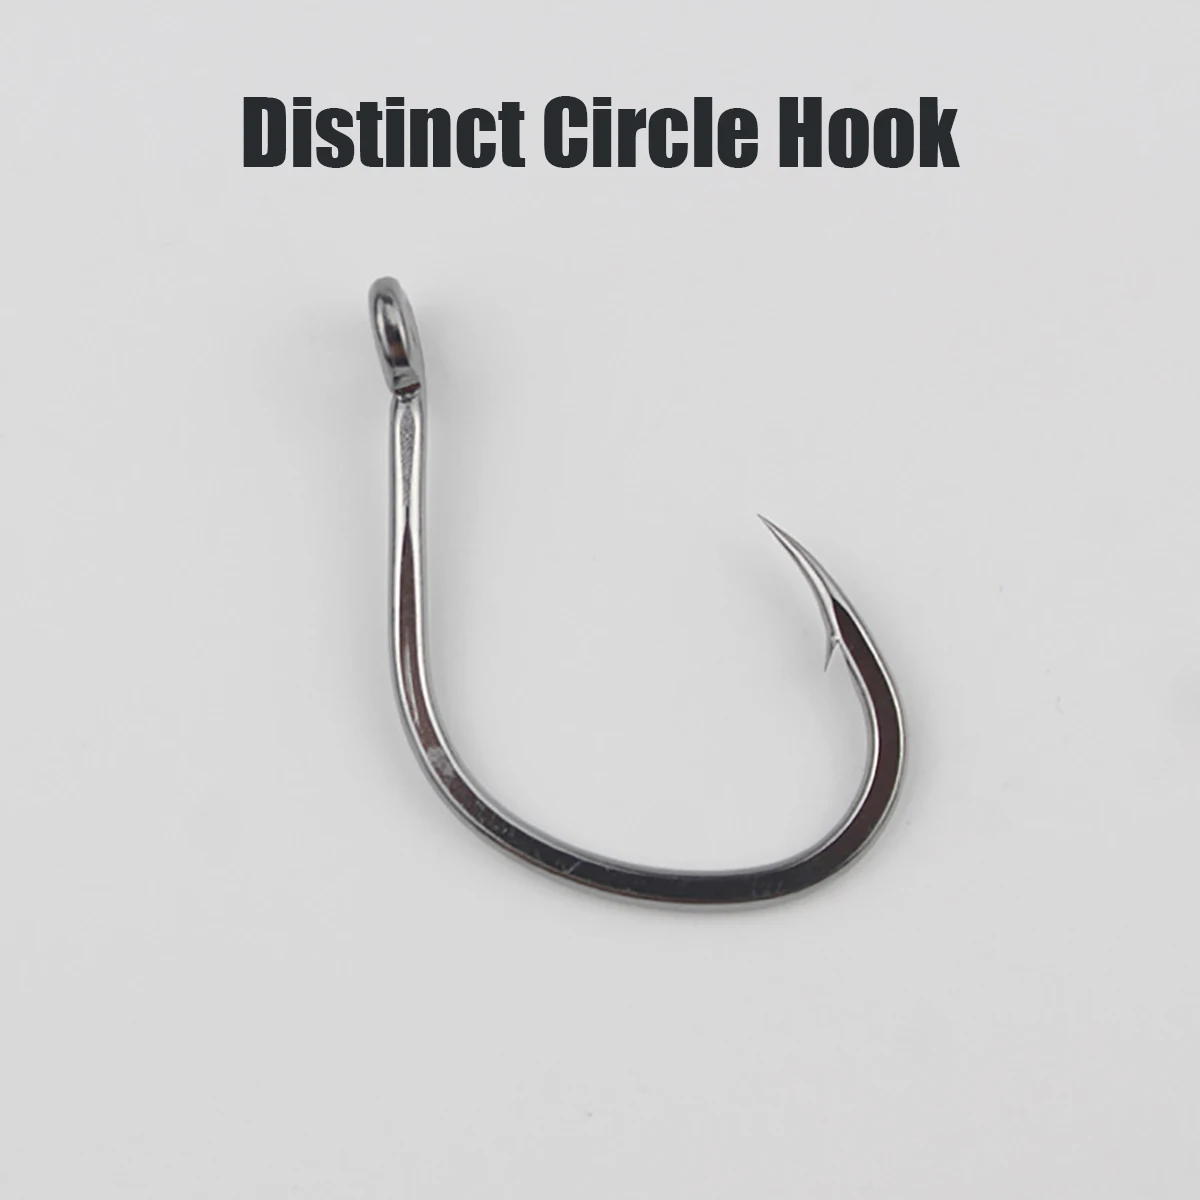 10pcs Fishing Circle Hook Wide Gap in-Line for Saltwater Freshwater, Alloy  carbon steel Fishing Hooks Catch Big Fish - AliExpress